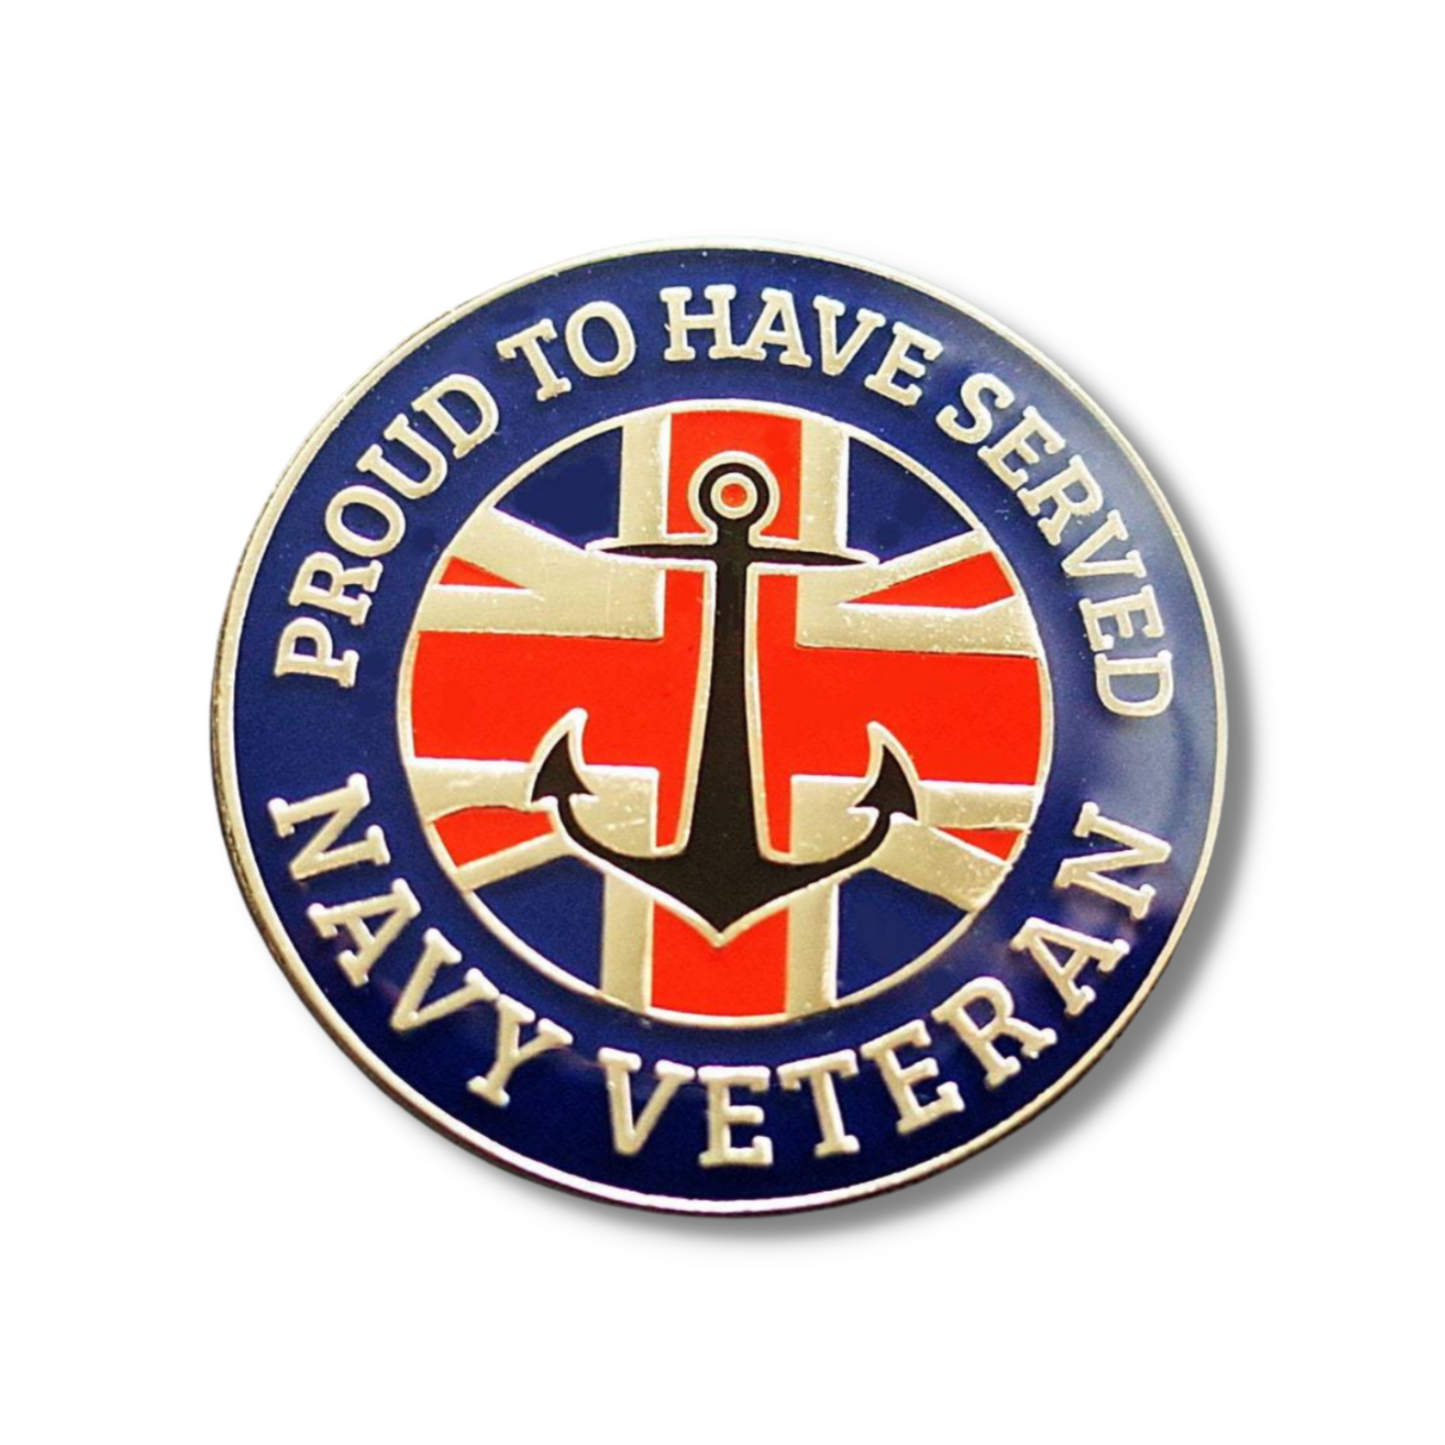 Proud To Have Served - Navy Veteran Pin Badge